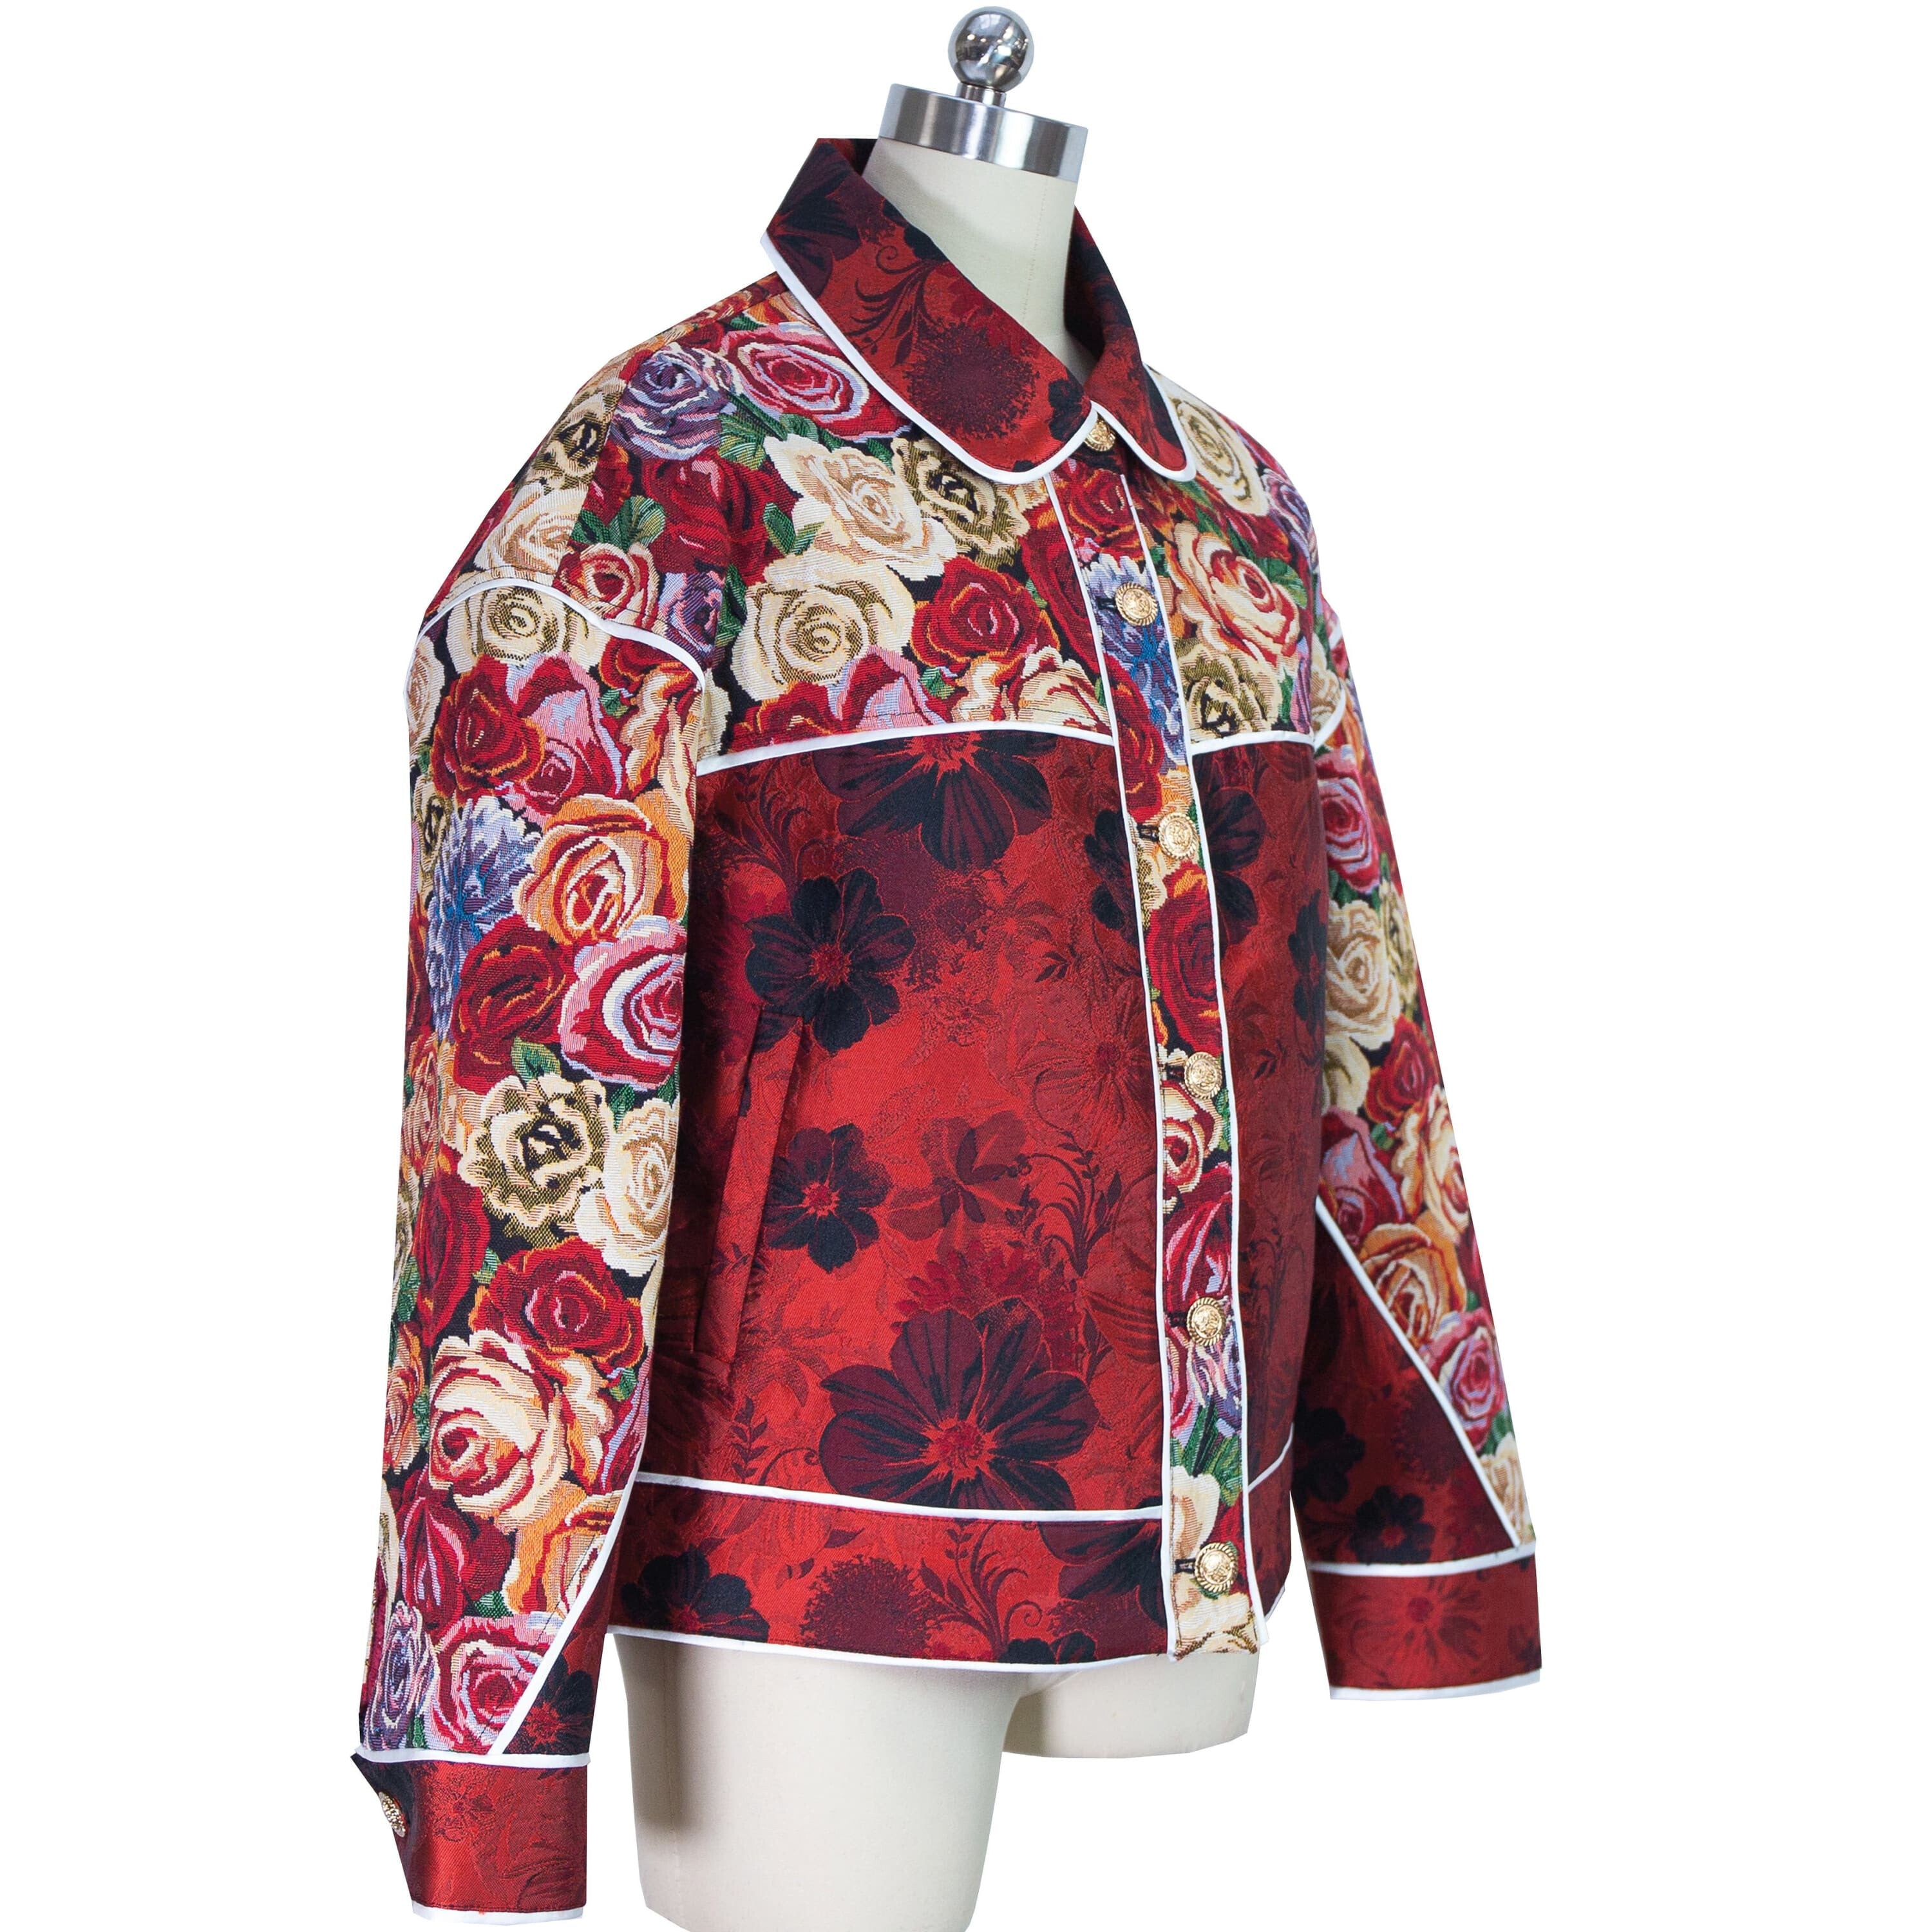 Nyx red patchwork jacket Studio - Coats and jackets